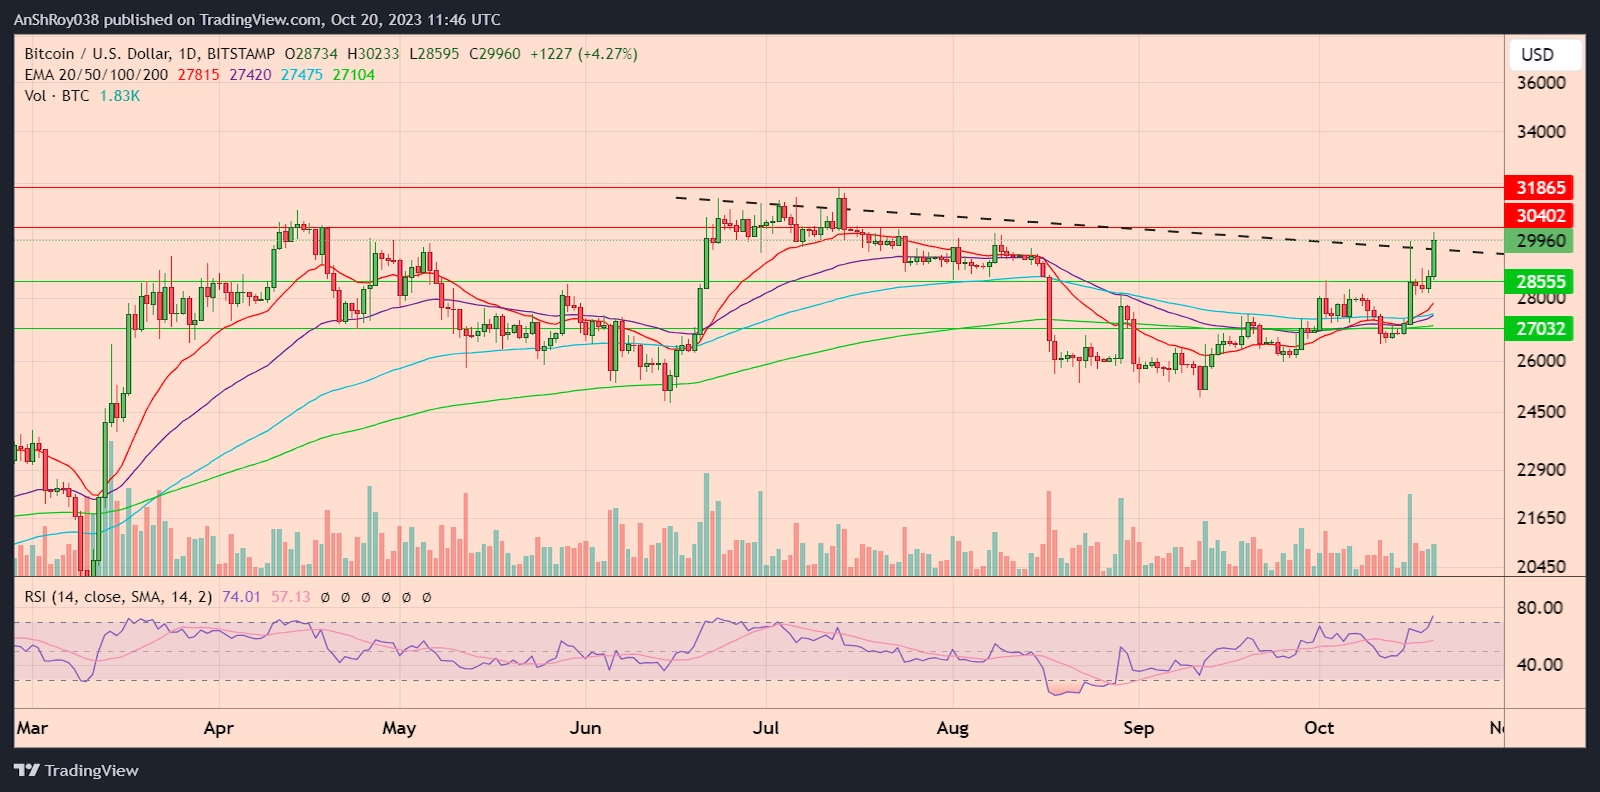 BTCUSD daily price chart with RSI. 